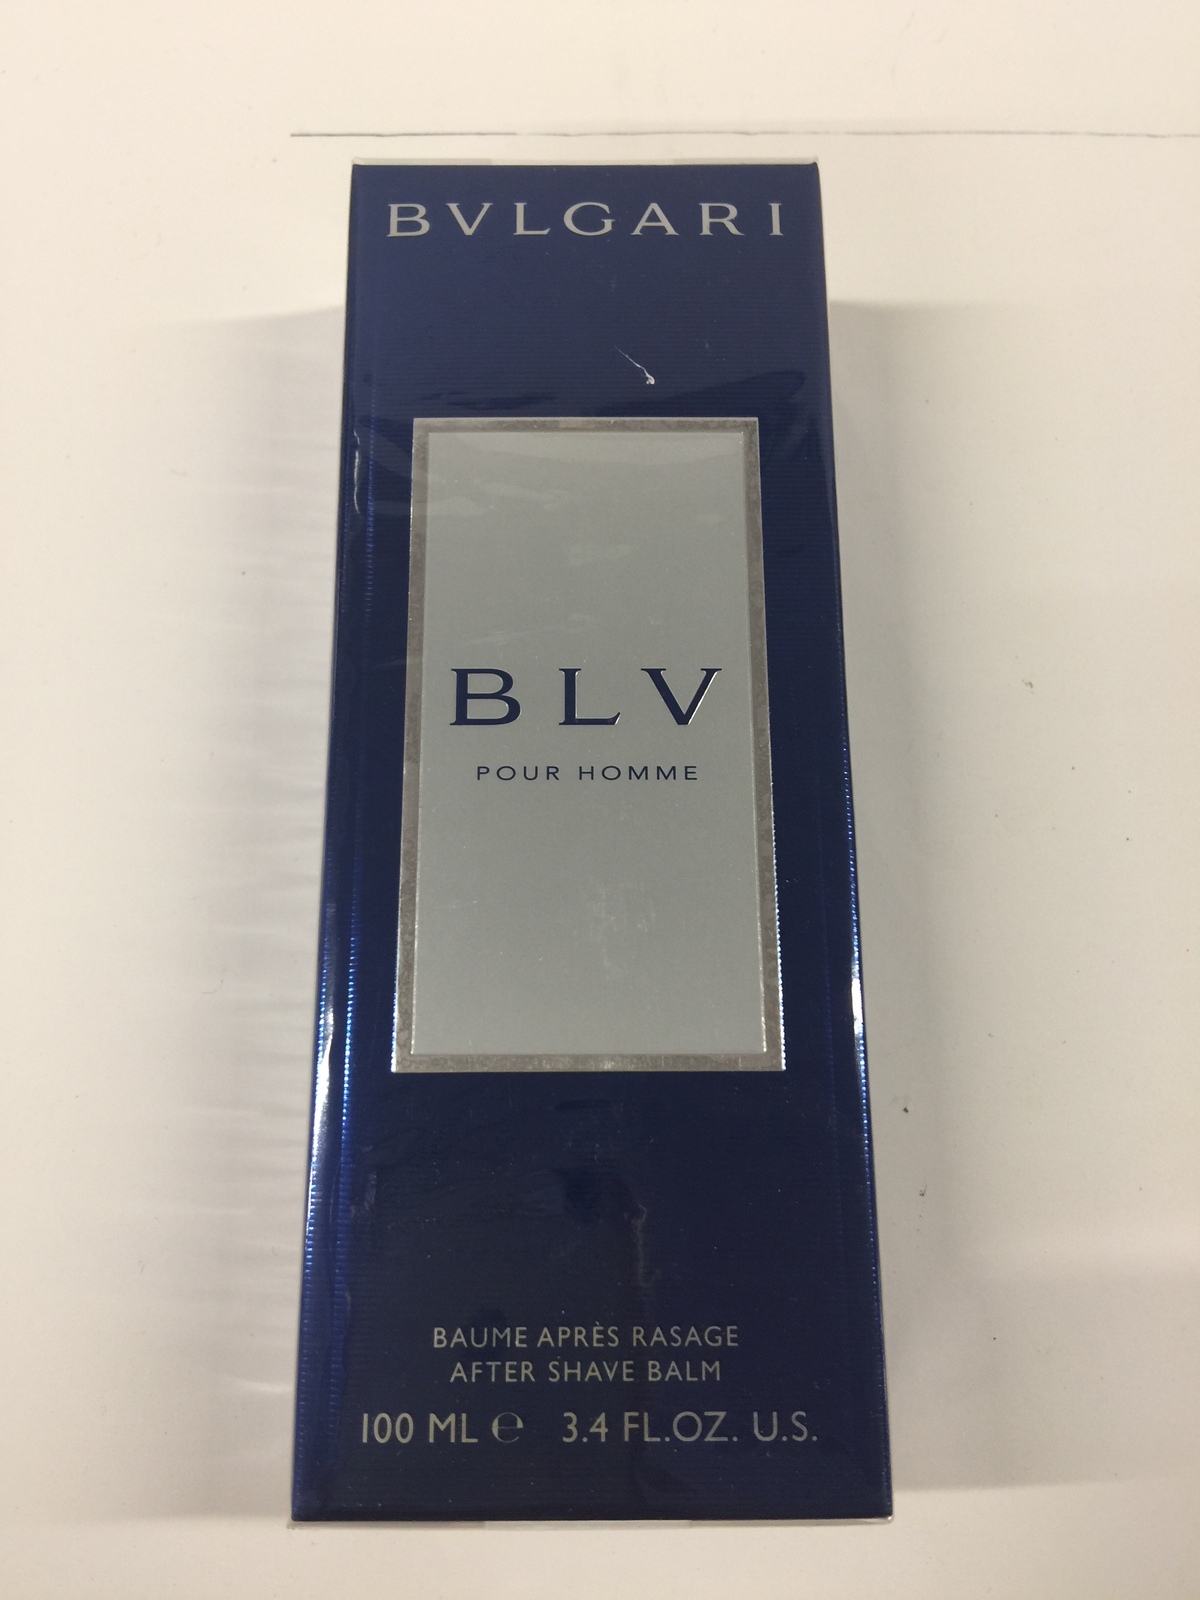 Primary image for Bvlgari BLV Pour Homme After Shave Balm 100 ml/3.4 fl oz- new in navy box